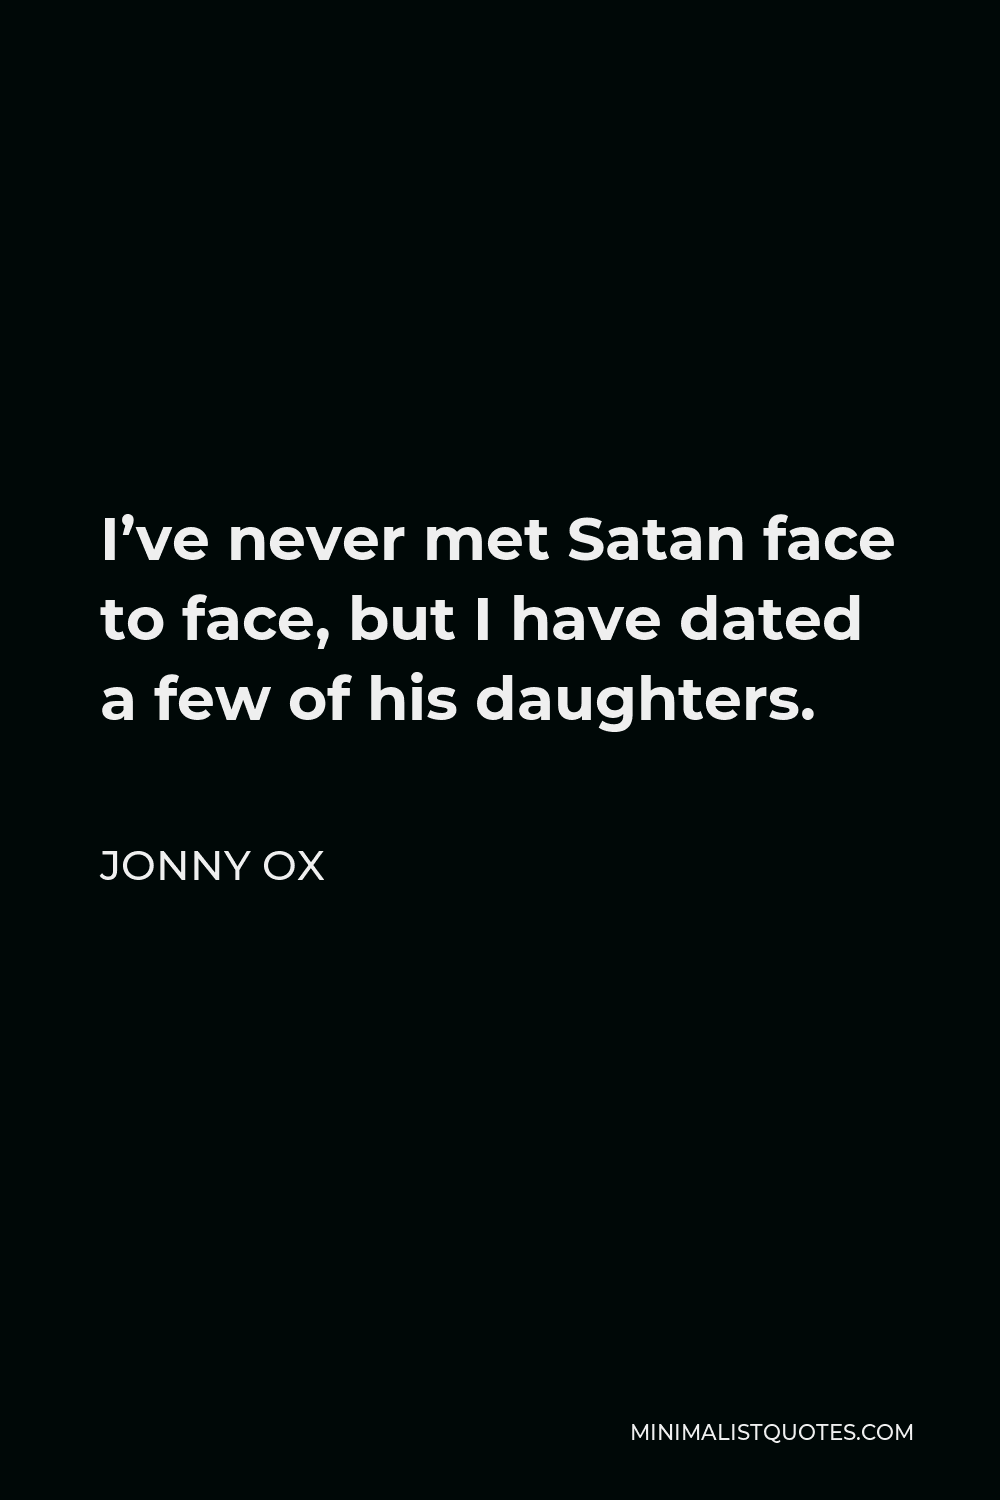 Jonny Ox Quote - I’ve never met Satan face to face, but I have dated a few of his daughters.